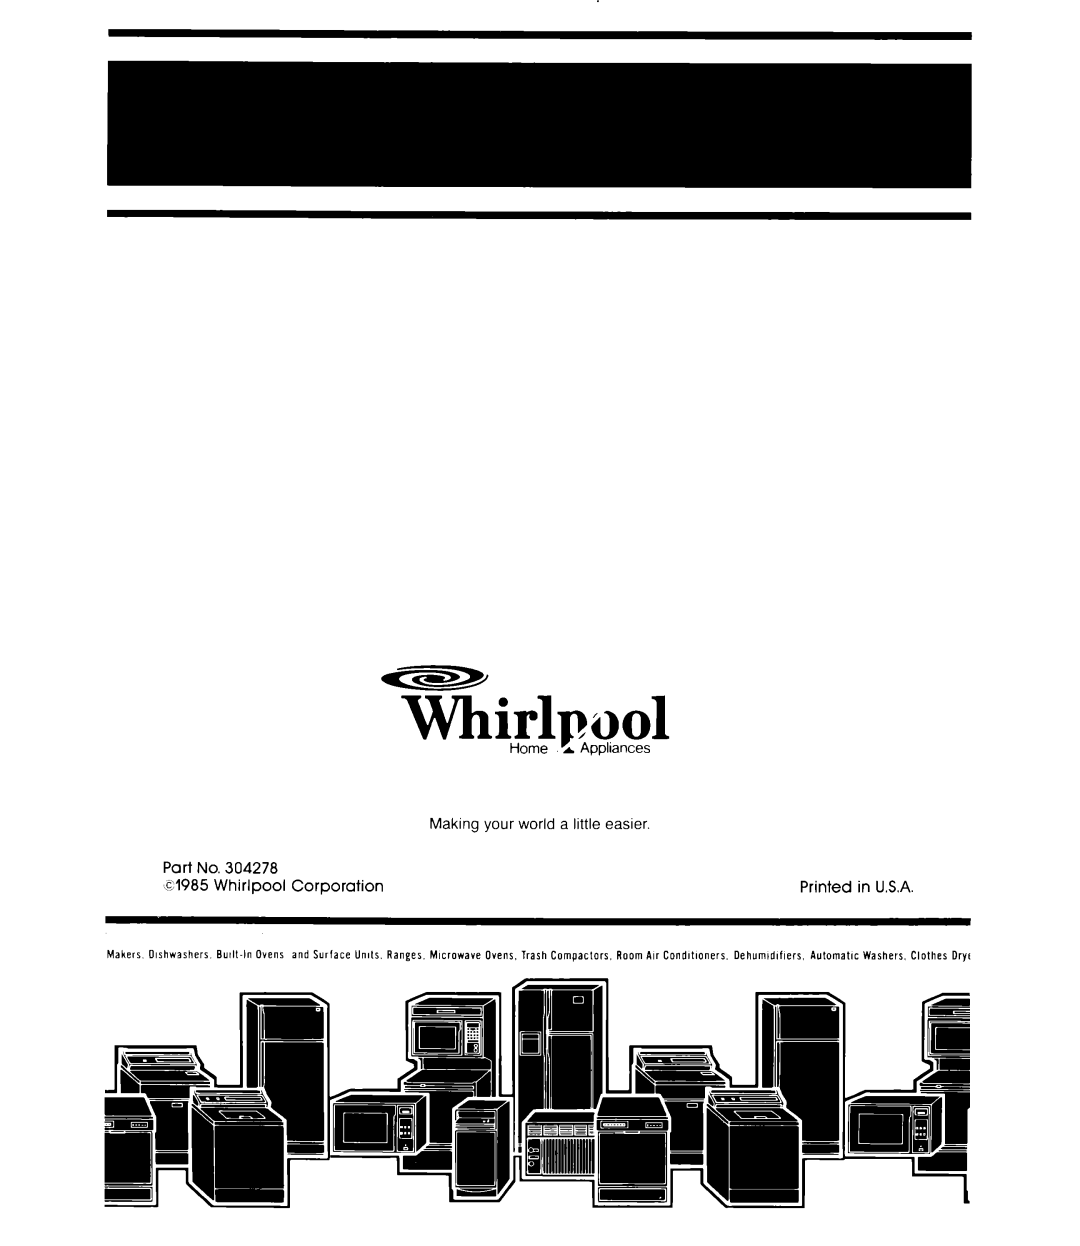 Whirlpool DU7500XR Series Appliances, Making your world a little easier, Part, ‘cl985 Whirlpool, Corporation, Printed 